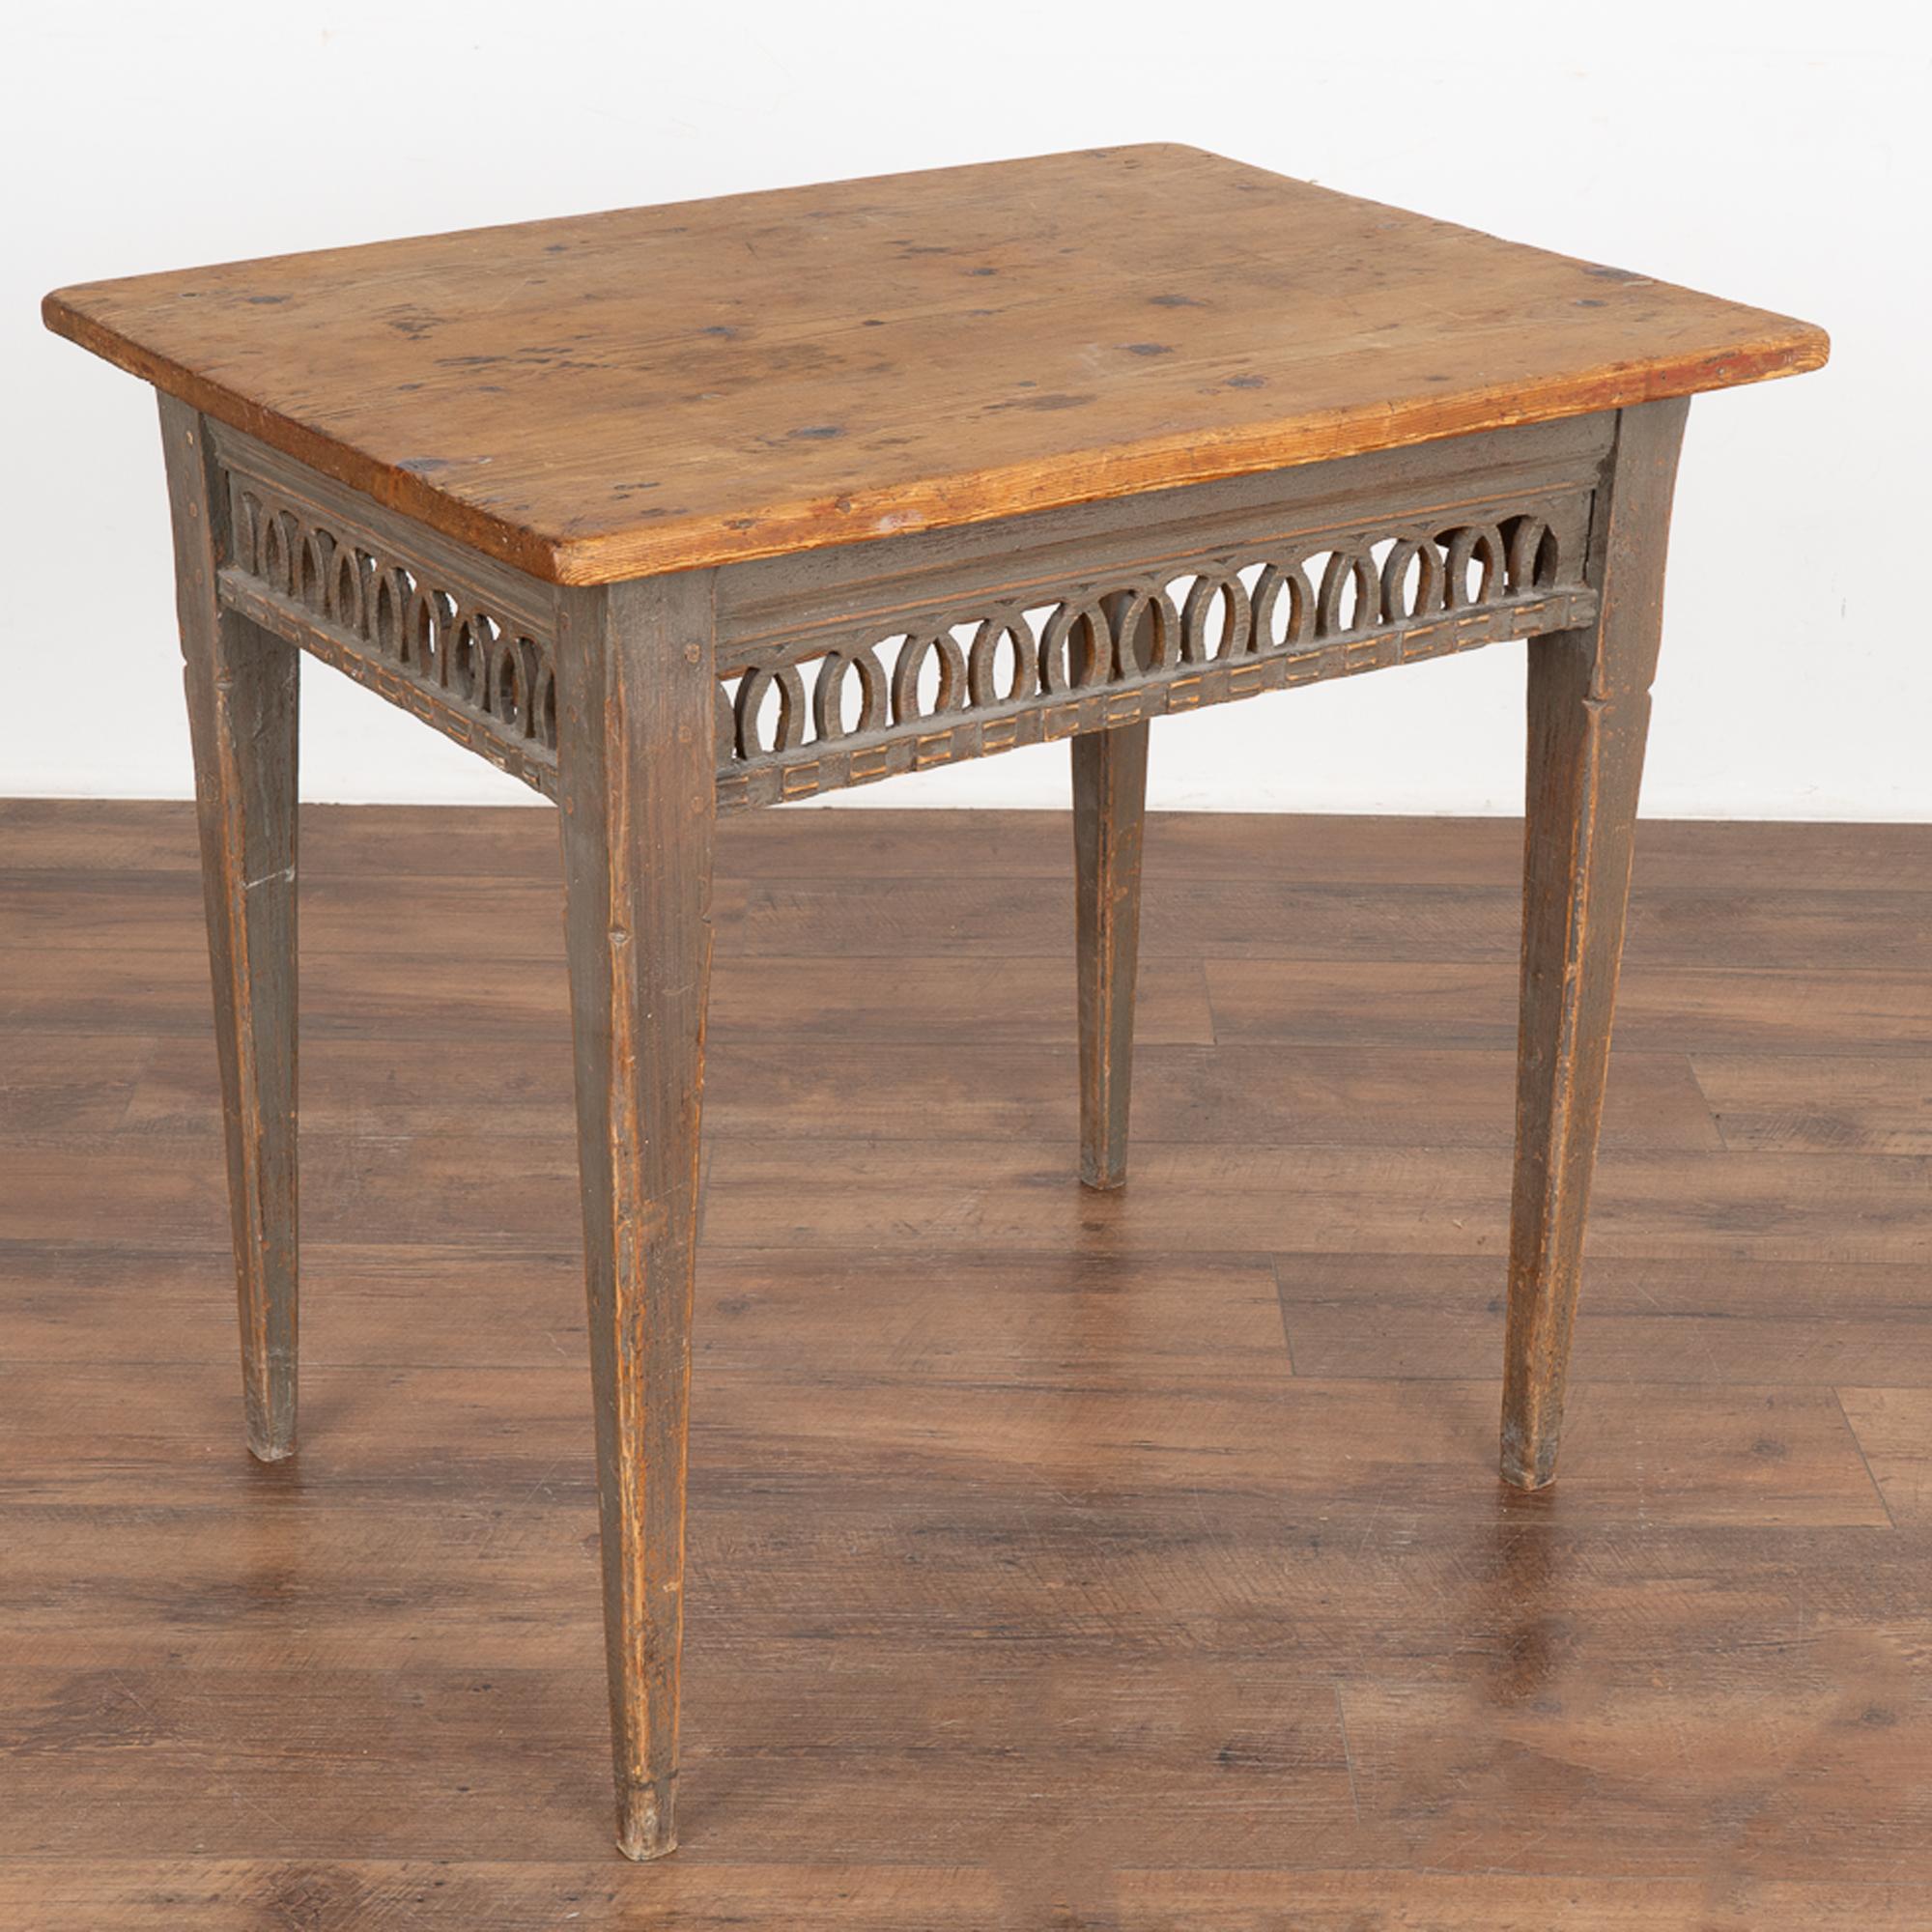 Gray Painted Side Table with Drawer, Sweden circa 1820-1840 6